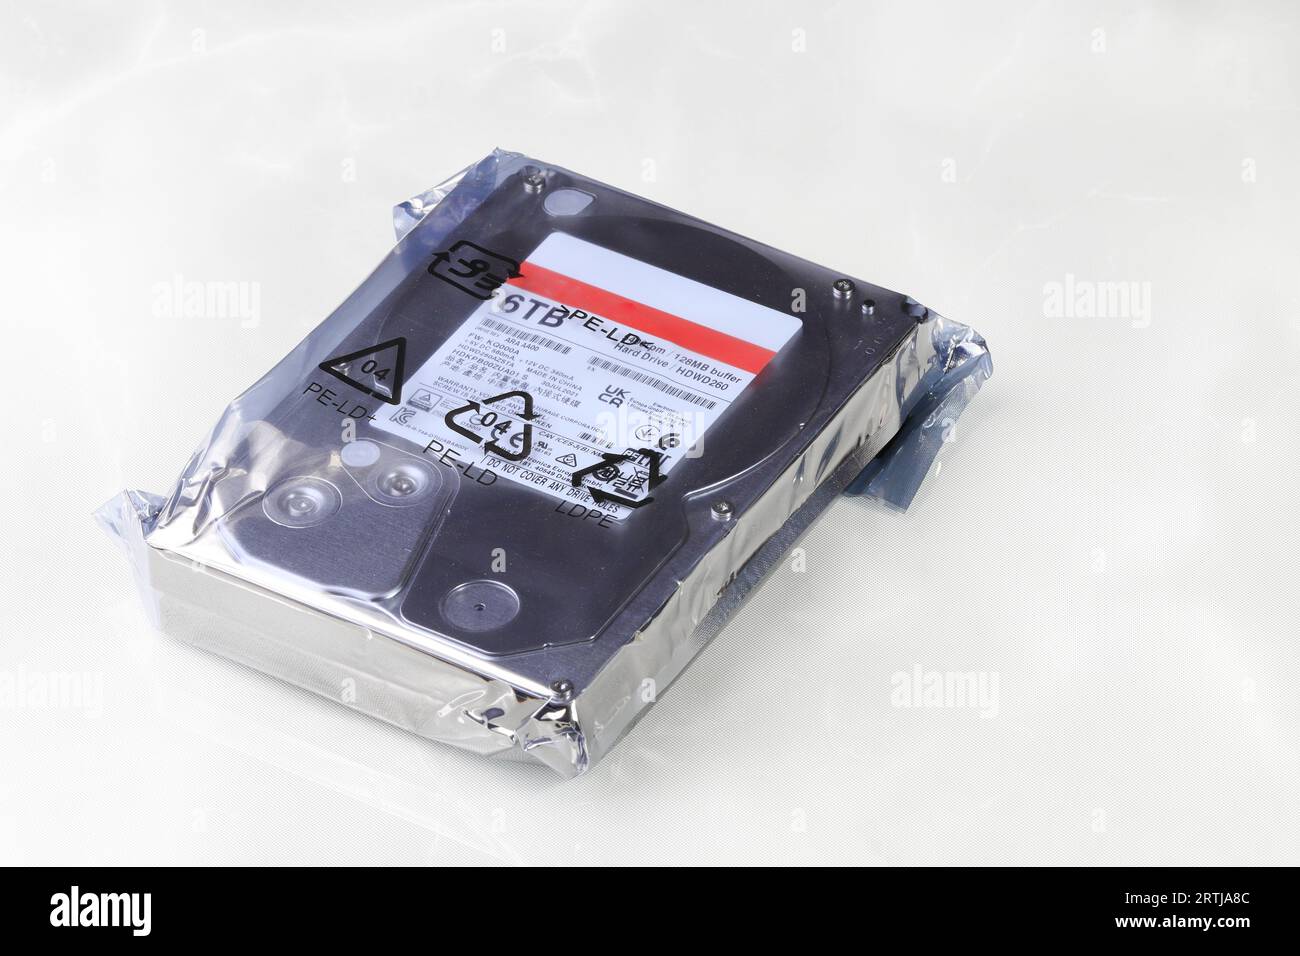 Close up view of high capacity computer hard drive 3.5" in LDPE Packaging isolated on white background. Stock Photo